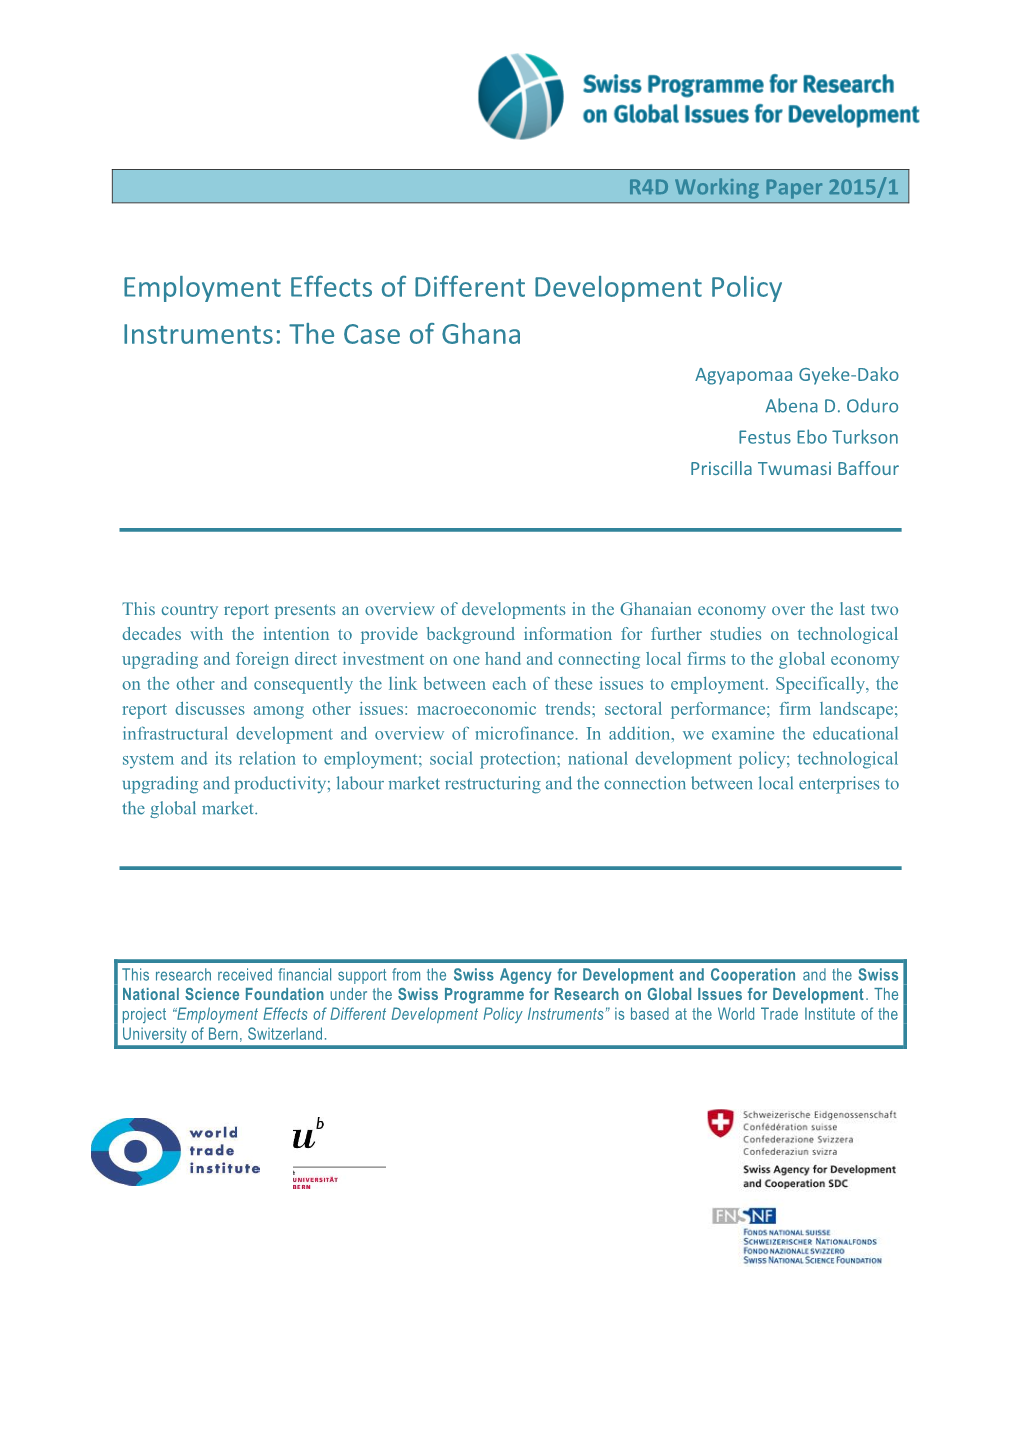 Employment Effects of Different Development Policy Instruments: the Case of Ghana Agyapomaa Gyeke-Dako Abena D